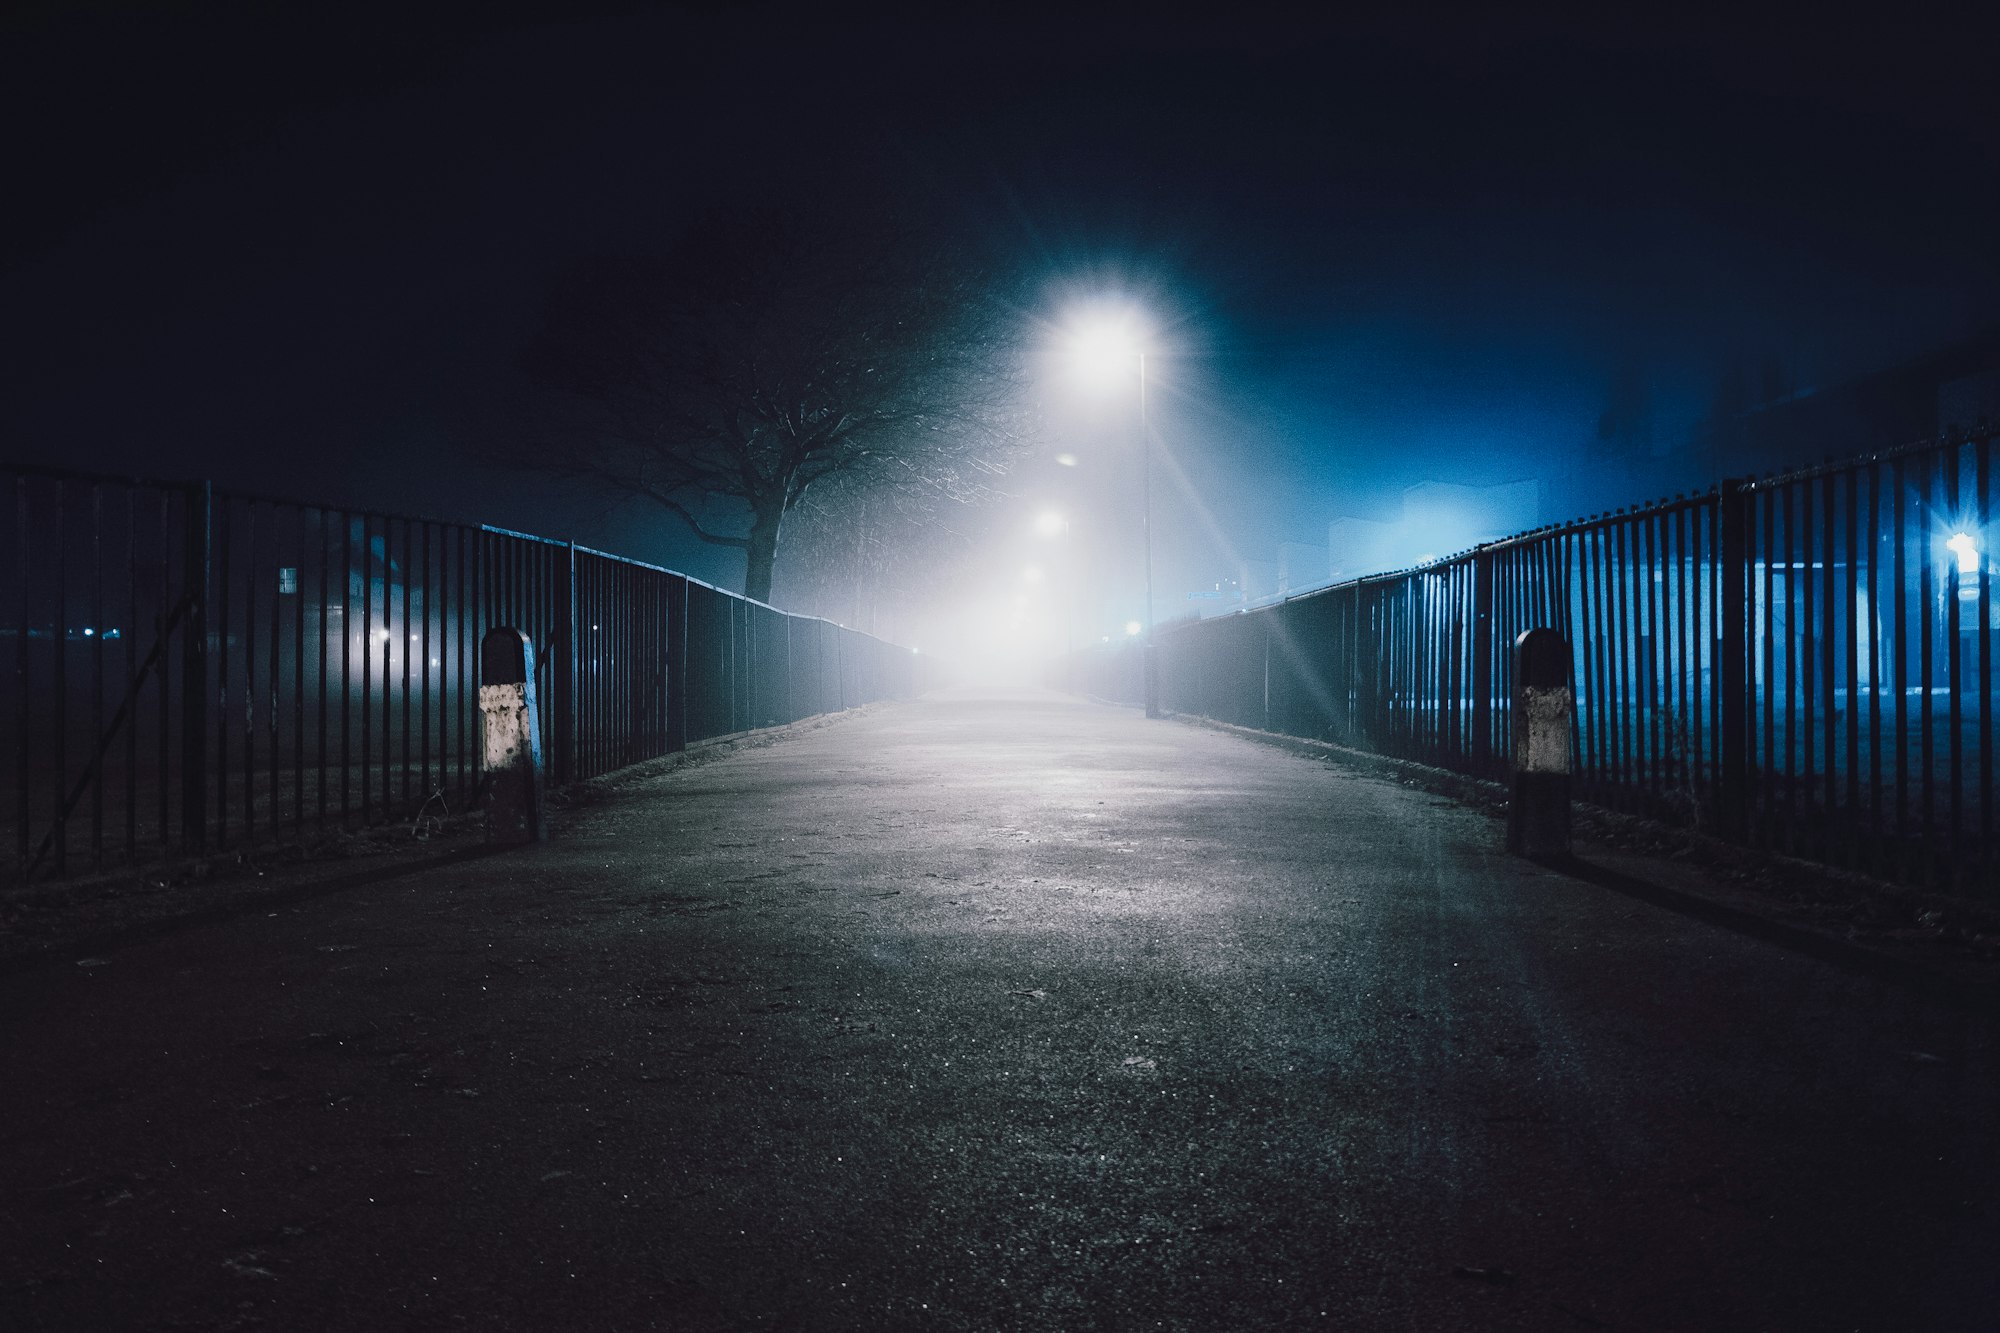 Shot on the walk home from a late night. Misty AF